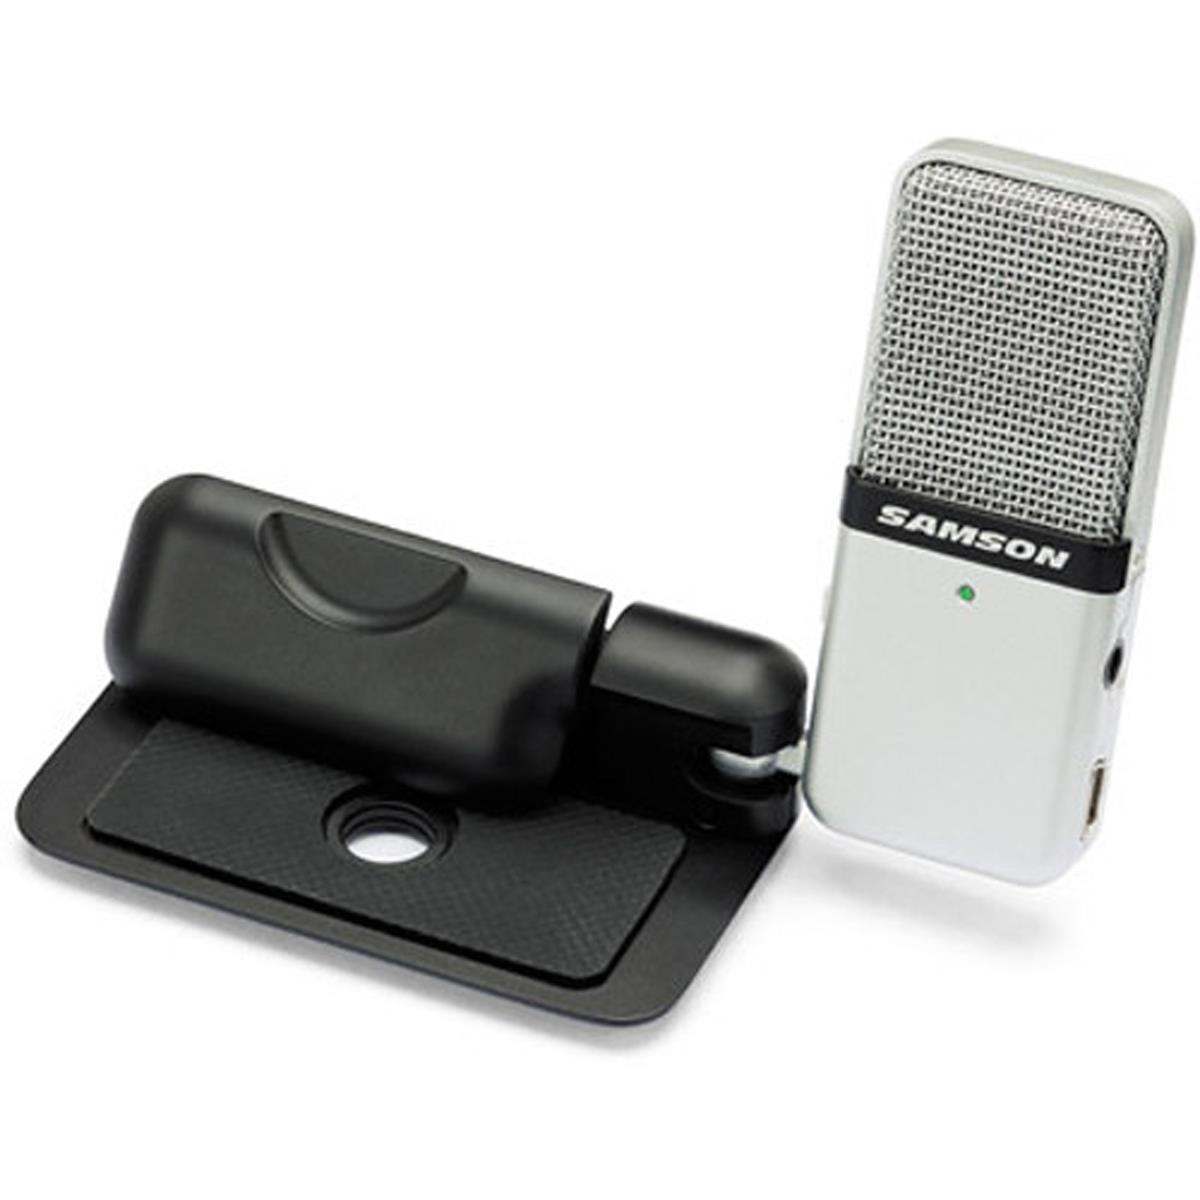 Image of Samson Go Mic USB Microphone for Mac and PC Computers